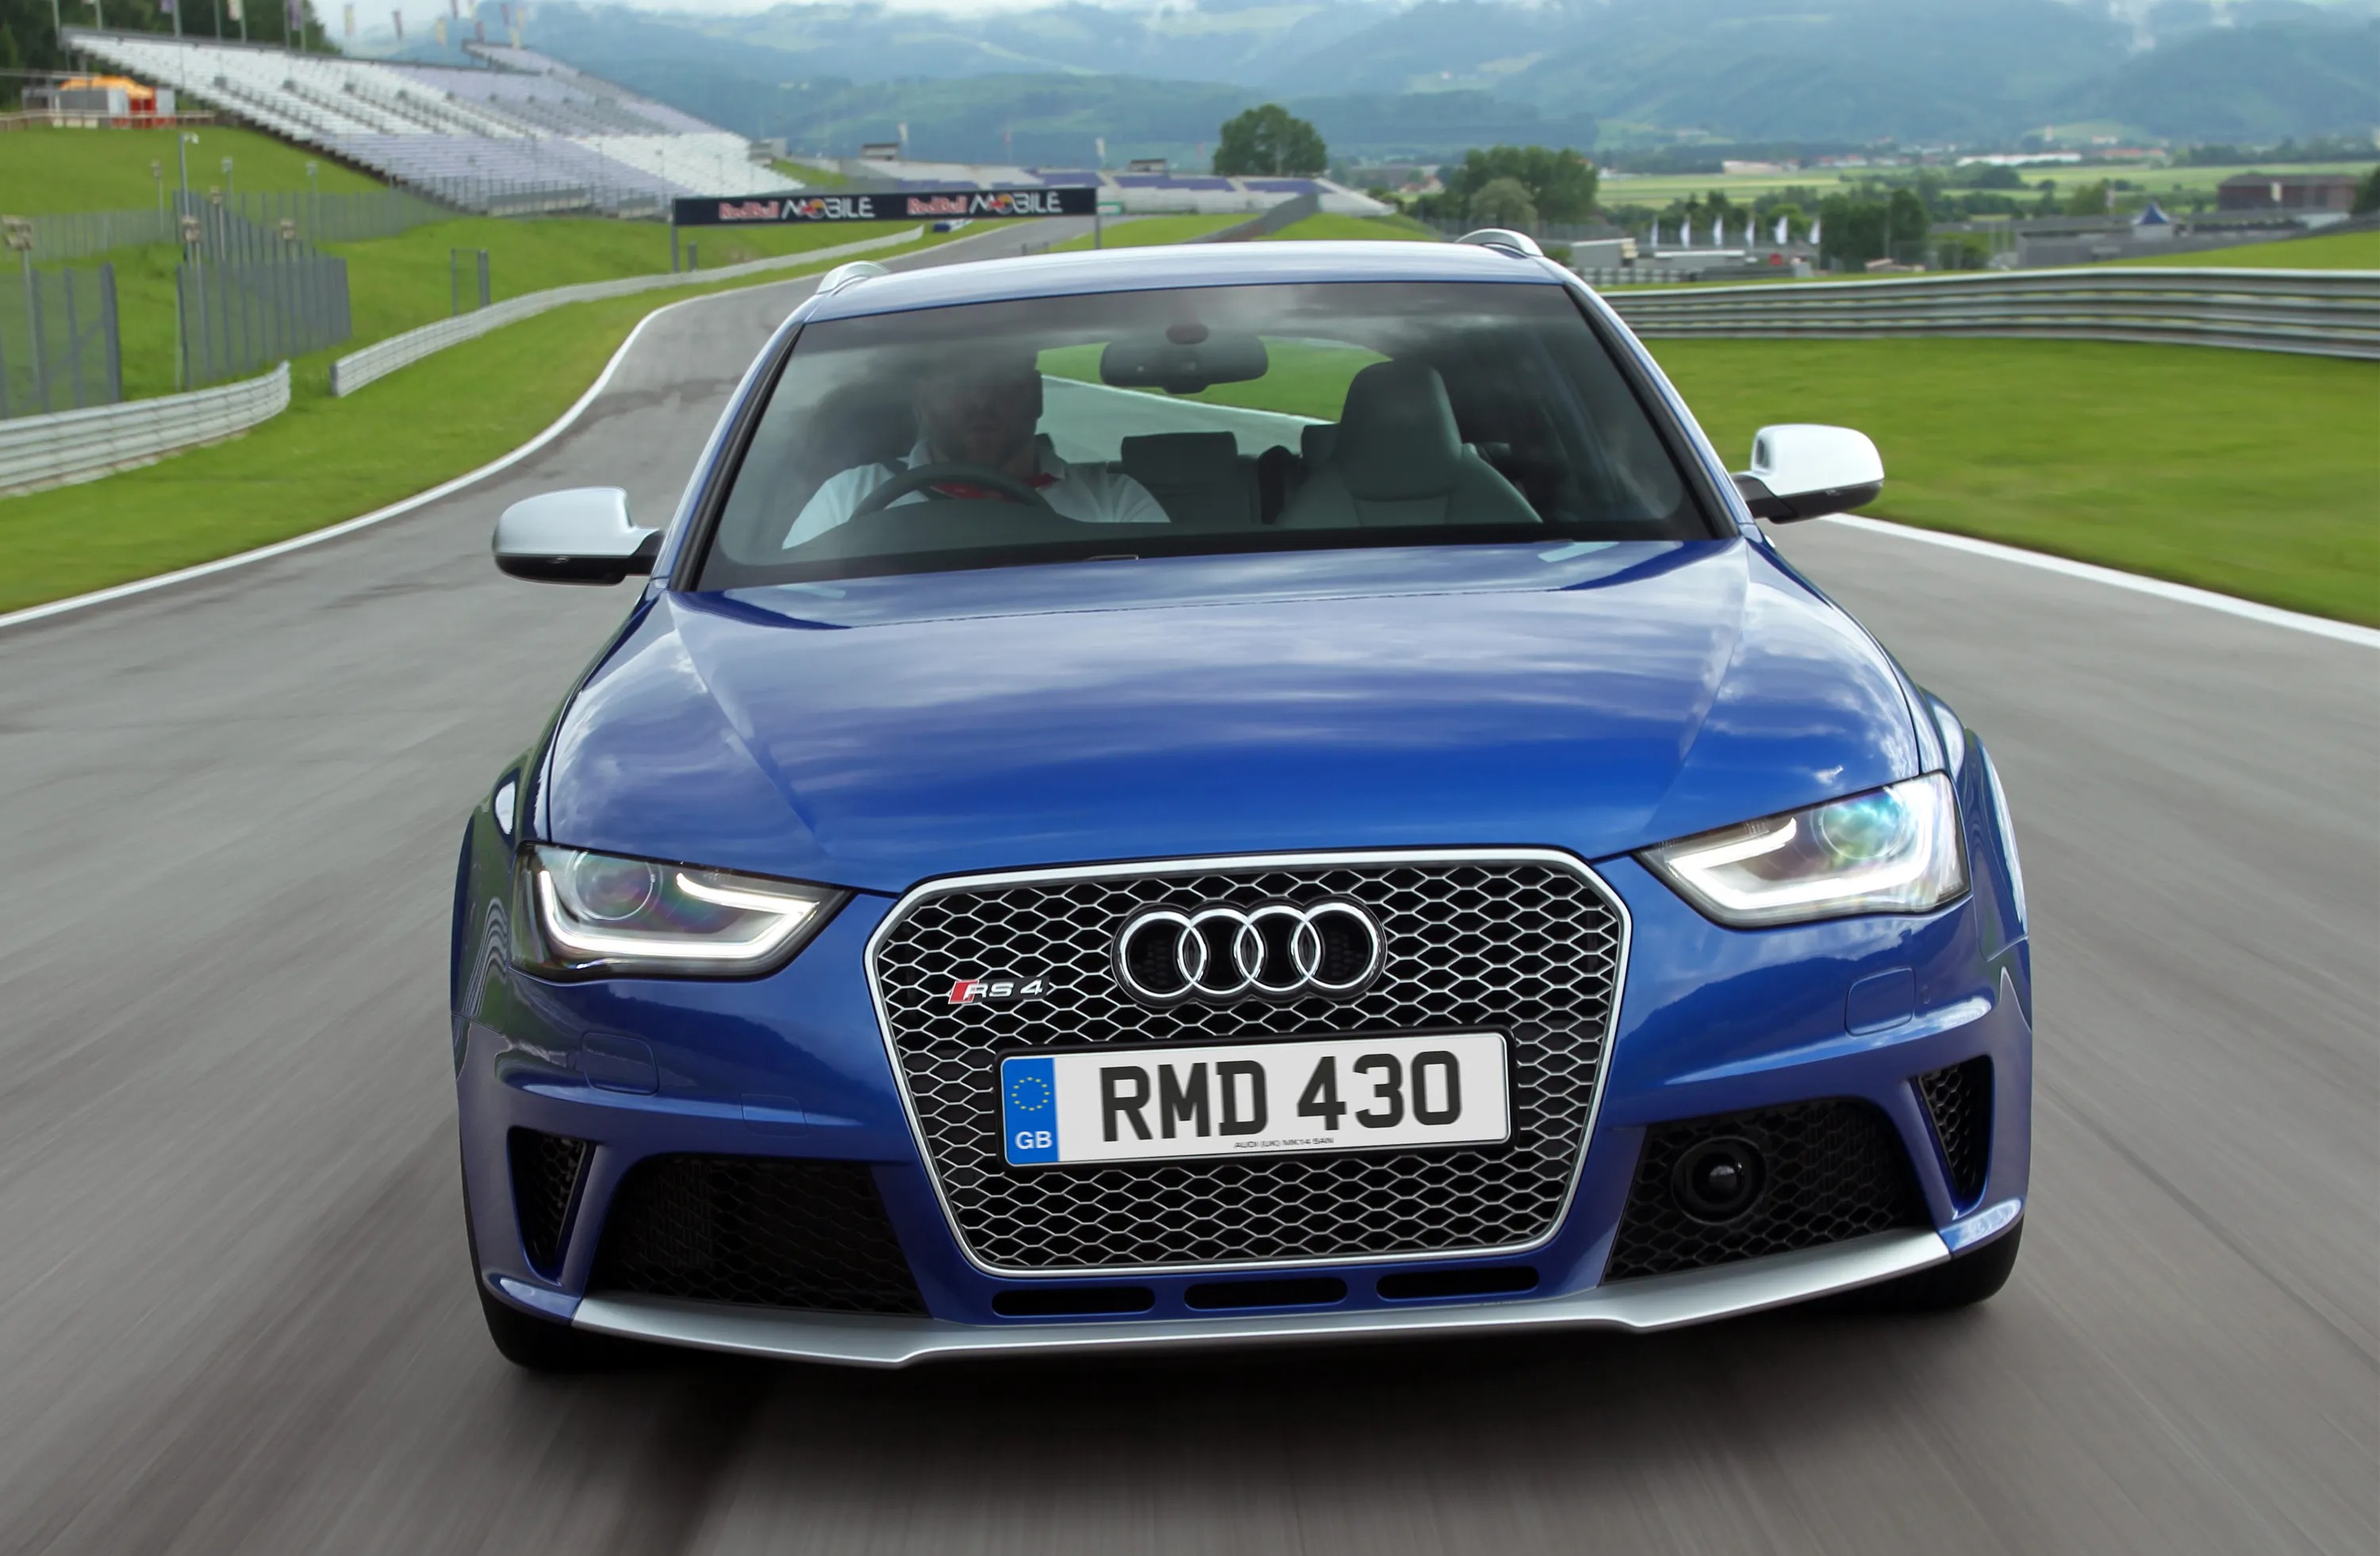 Instead, Ronnie swears by the Audi RS4 Avant